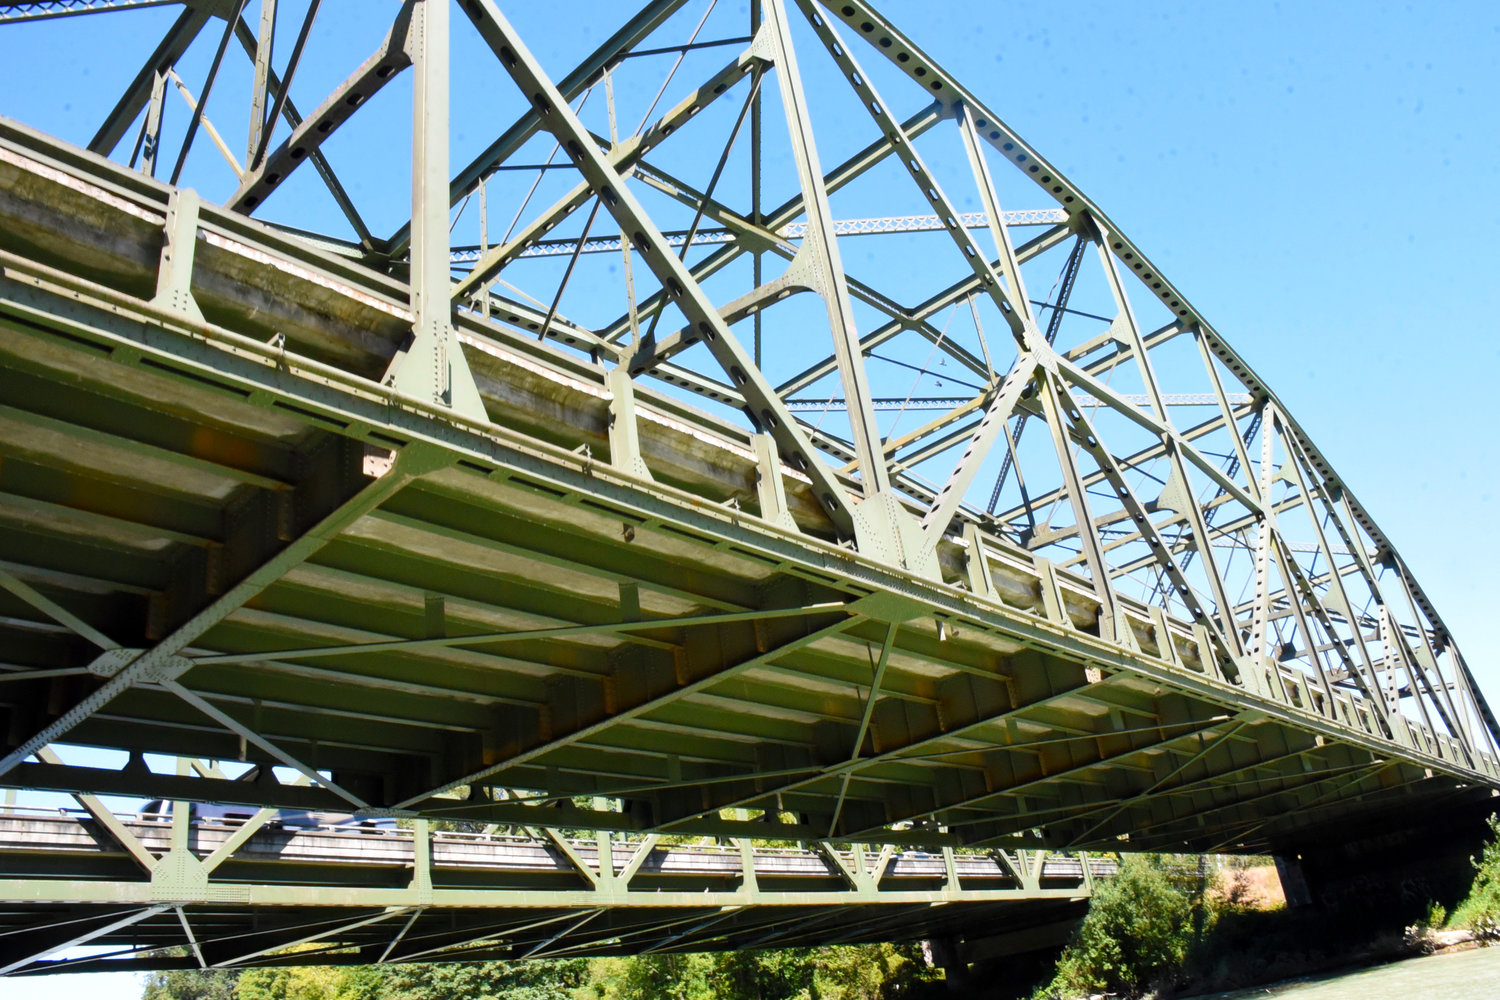 The Nisqually River Bridge is pictured.